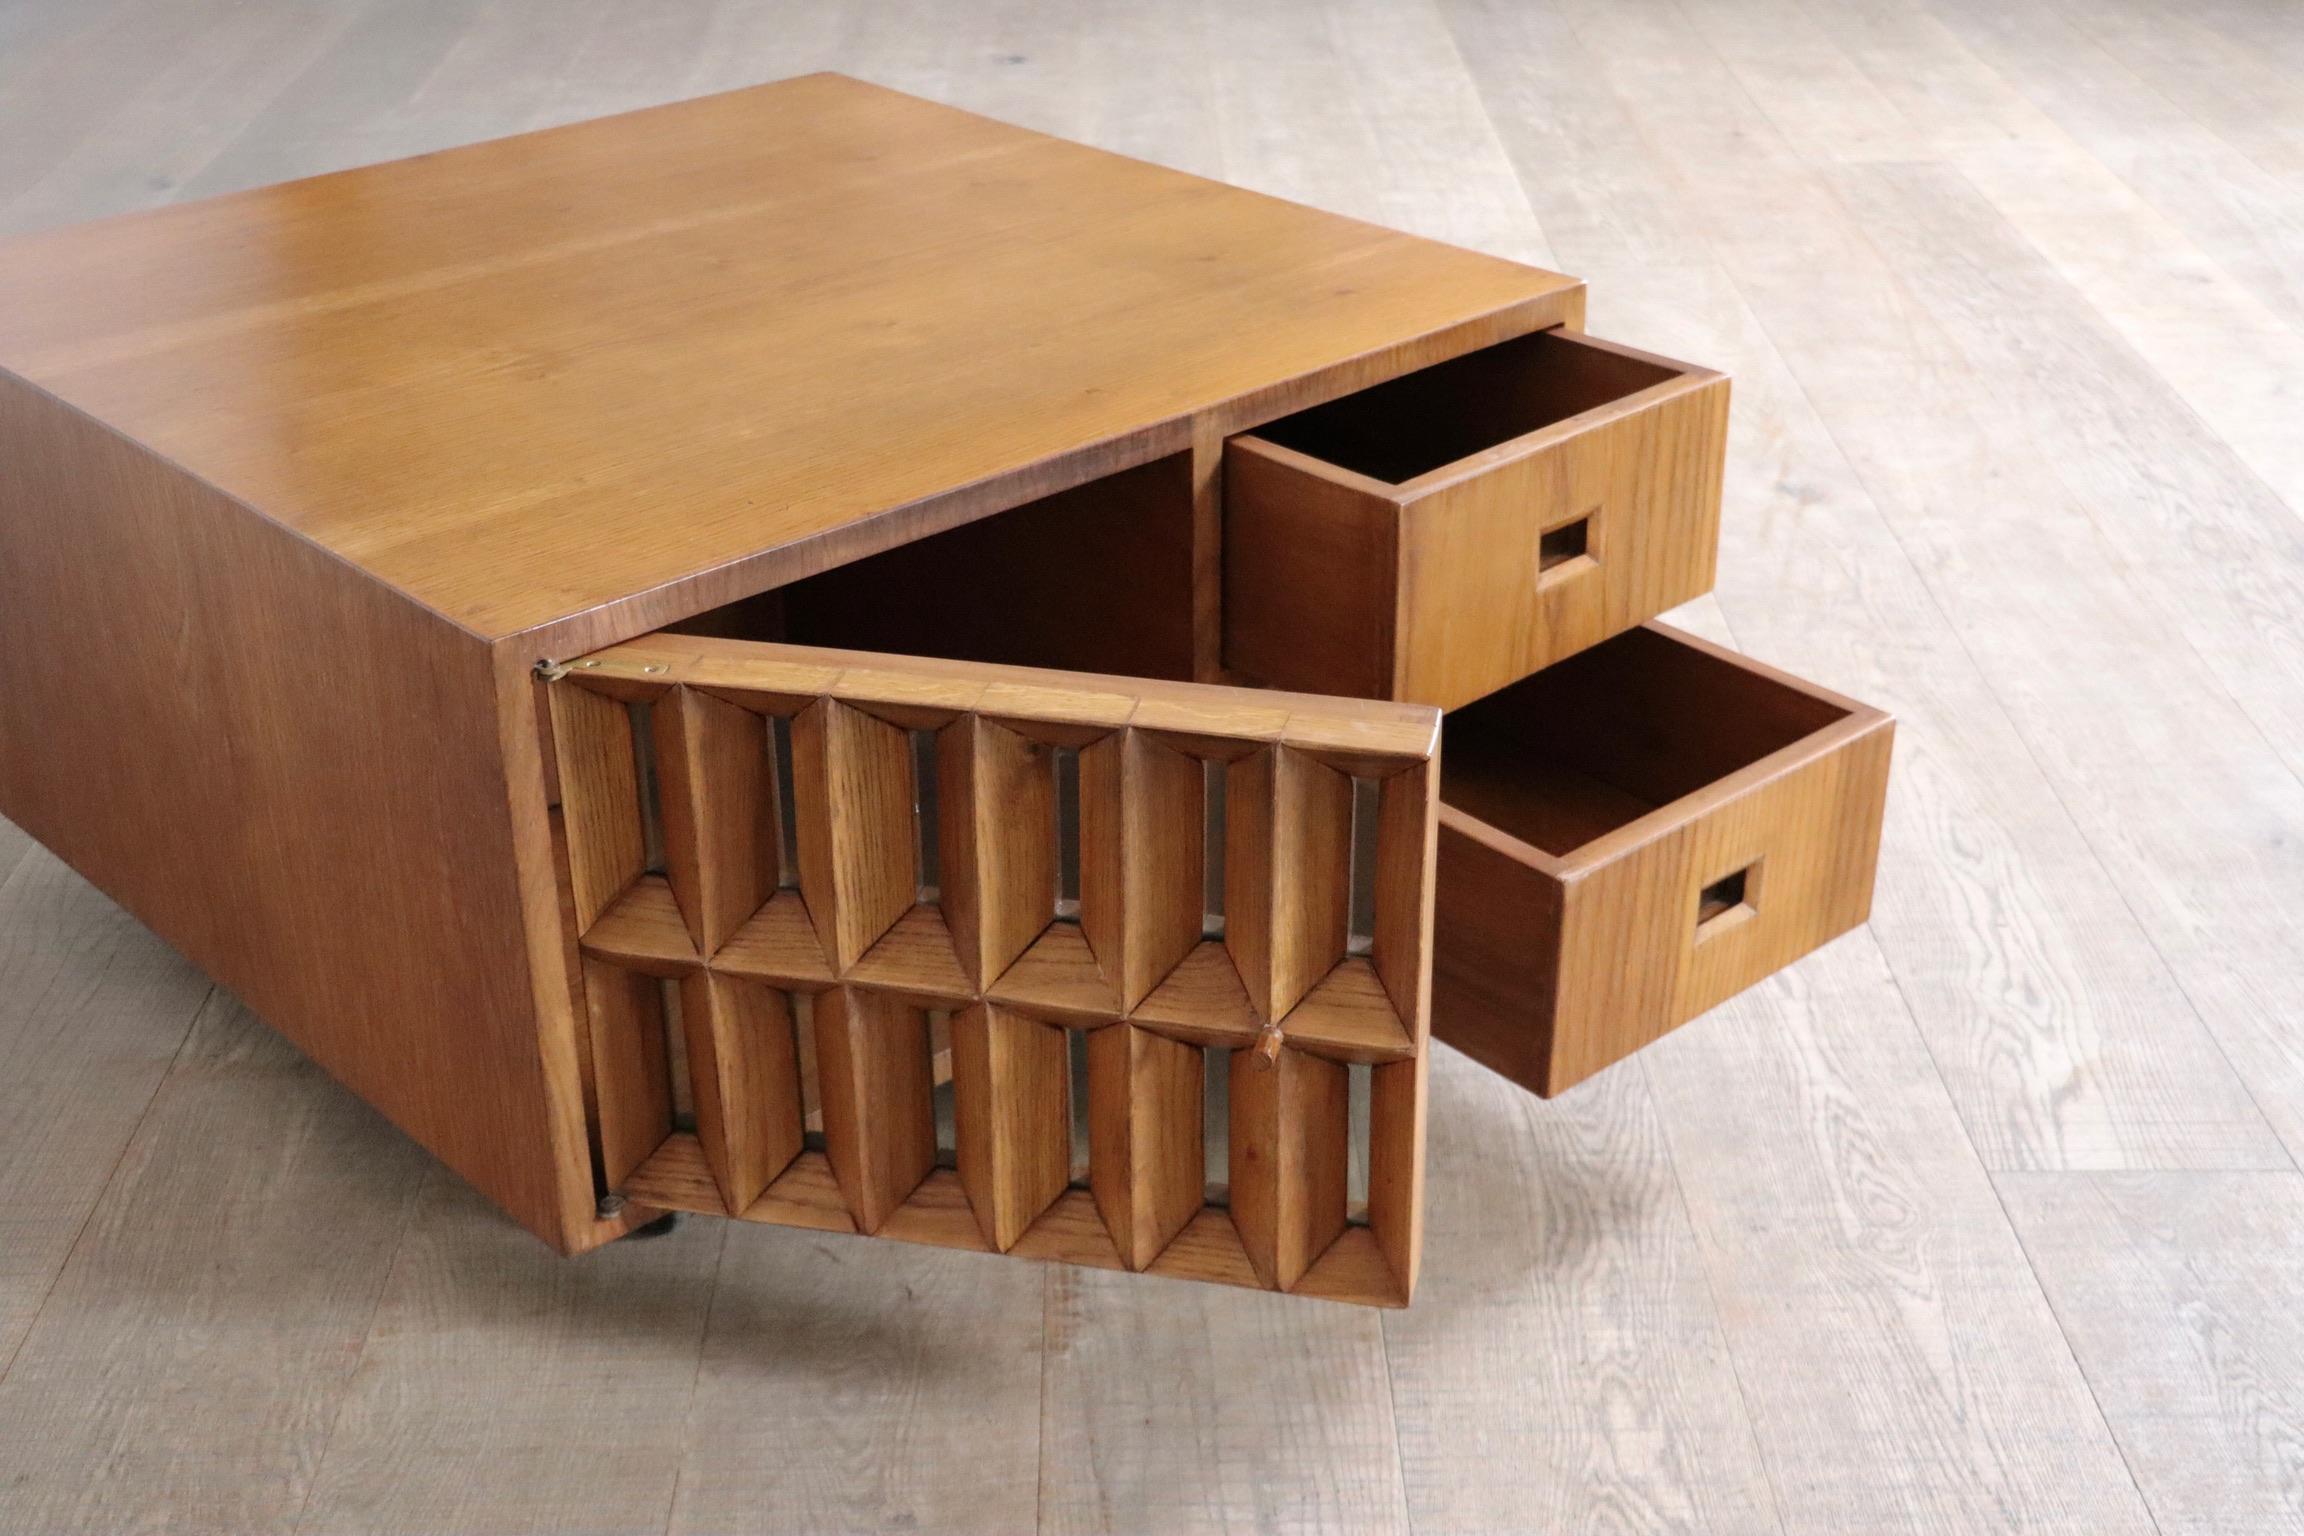 Giuseppe Rivadossi Coffee Table In Oak With Glass Framed Doors, Italy 1975 For Sale 4